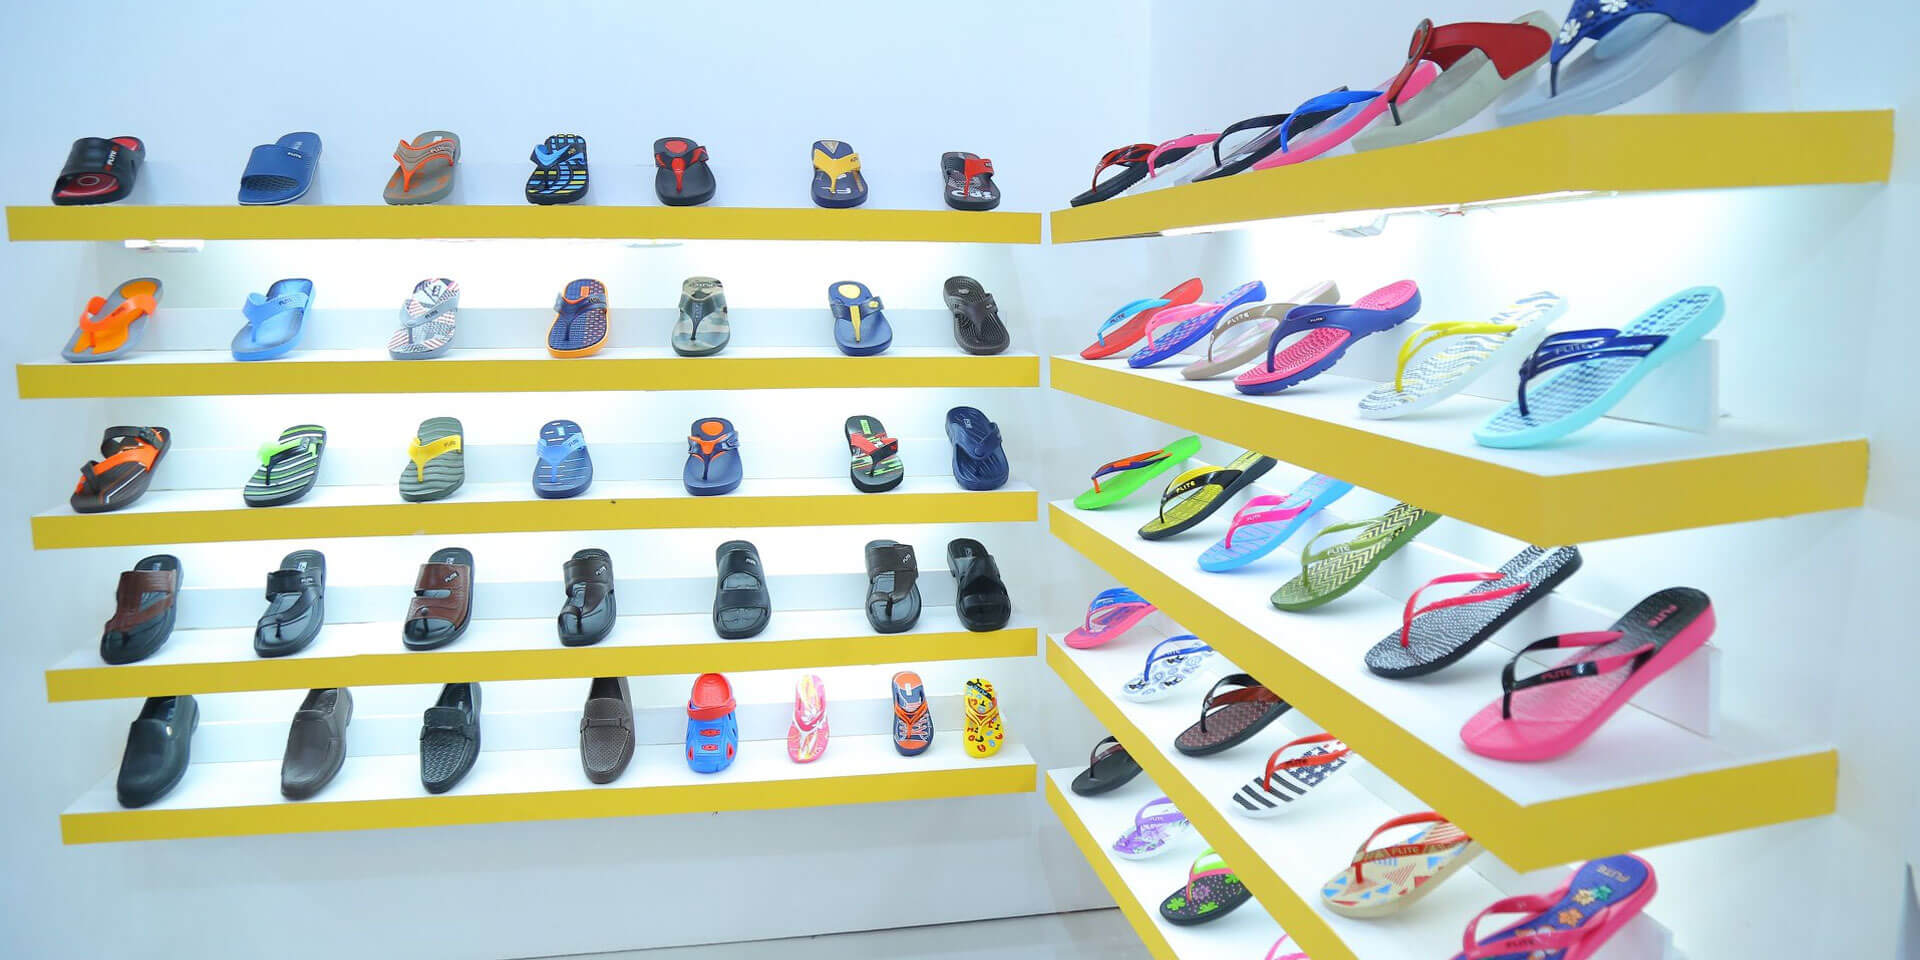 Relaxo Footwear chose LS Retail software solution